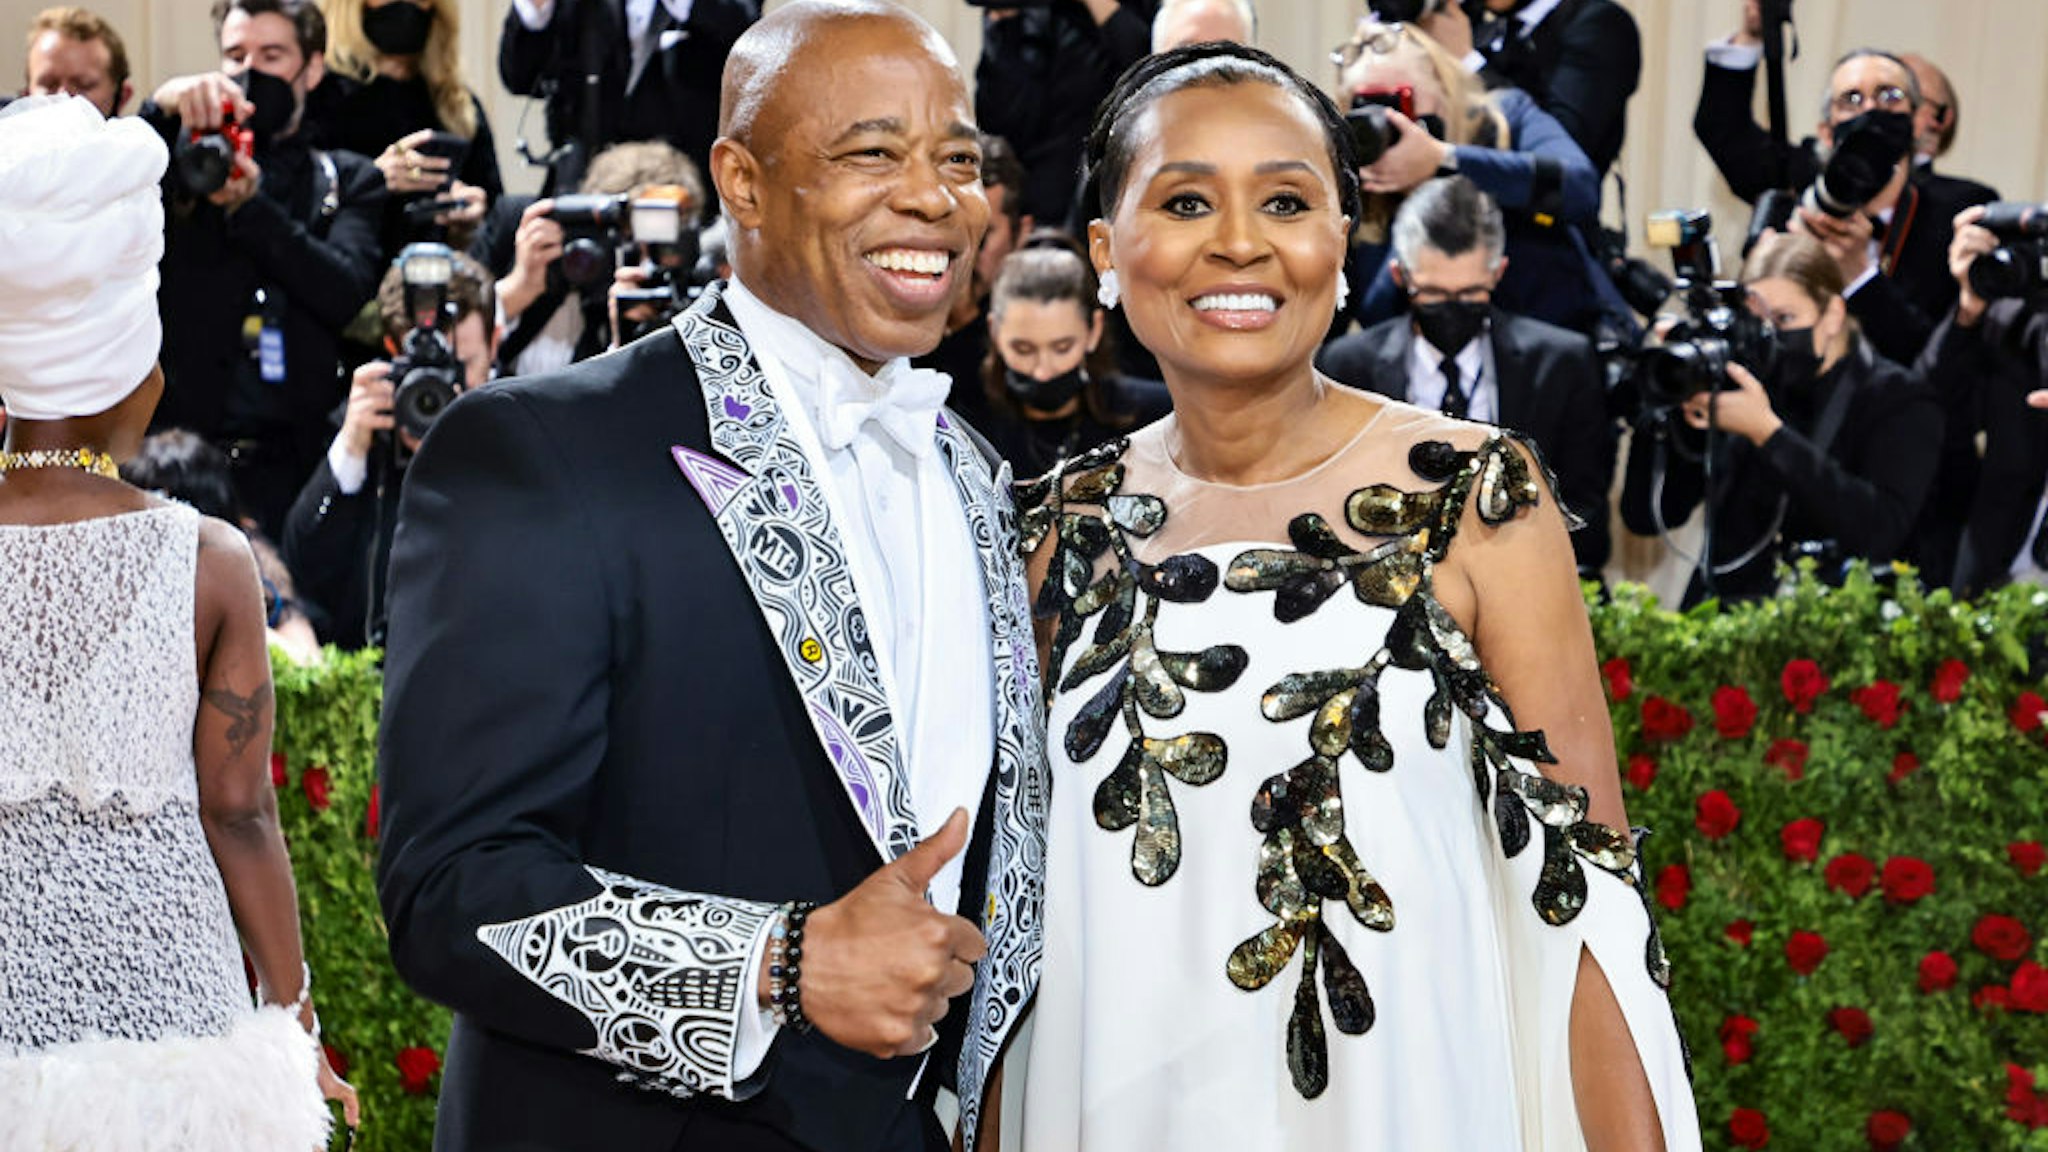 NEW YORK, NEW YORK - MAY 02: (L-R) New York City Mayor Eric Adams and Tracey Collins attend The 2022 Met Gala Celebrating "In America: An Anthology of Fashion" at The Metropolitan Museum of Art on May 02, 2022 in New York City. (Photo by Jamie McCarthy/Getty Images)